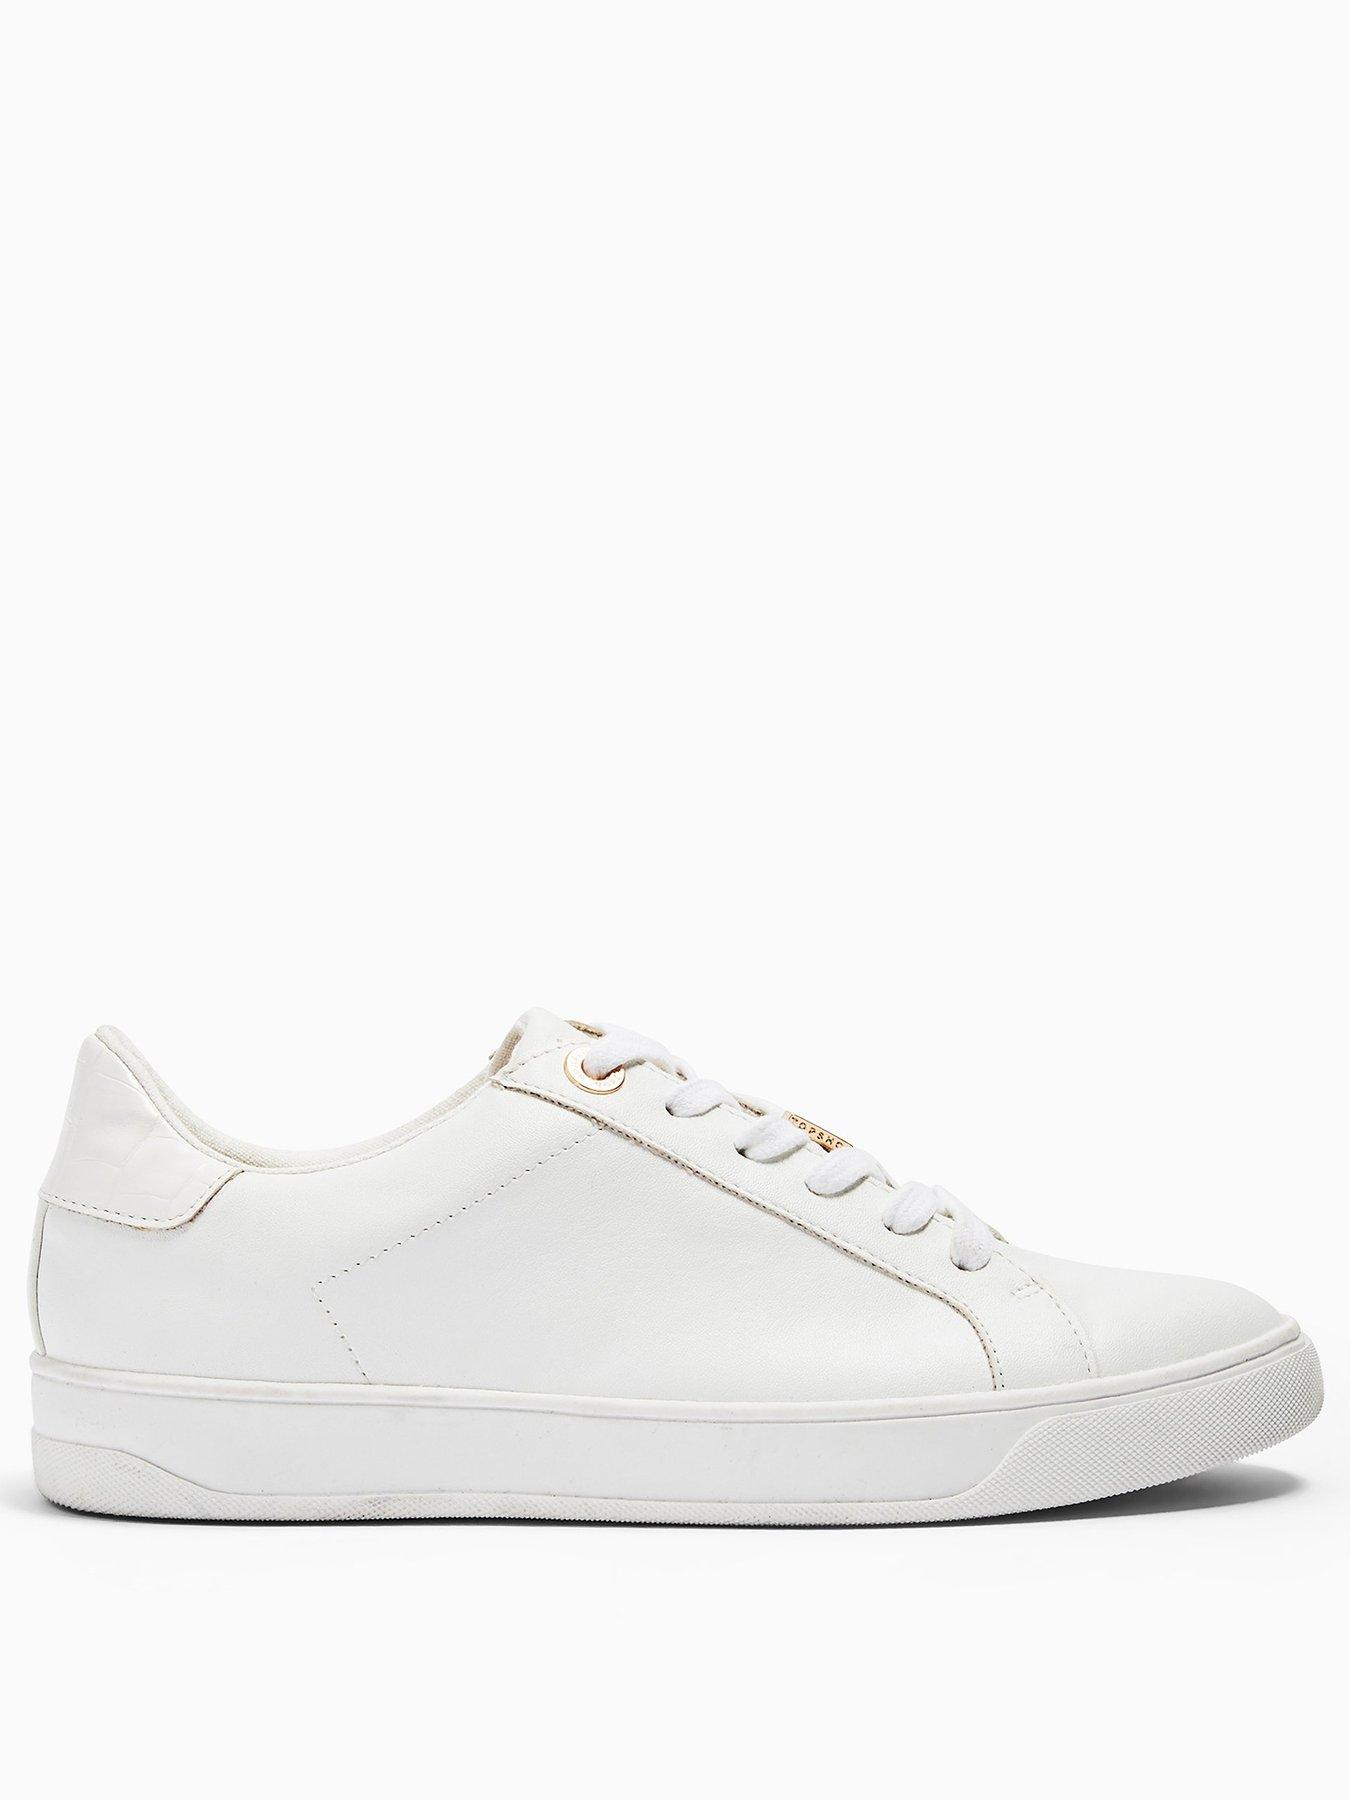 topshop trainers white